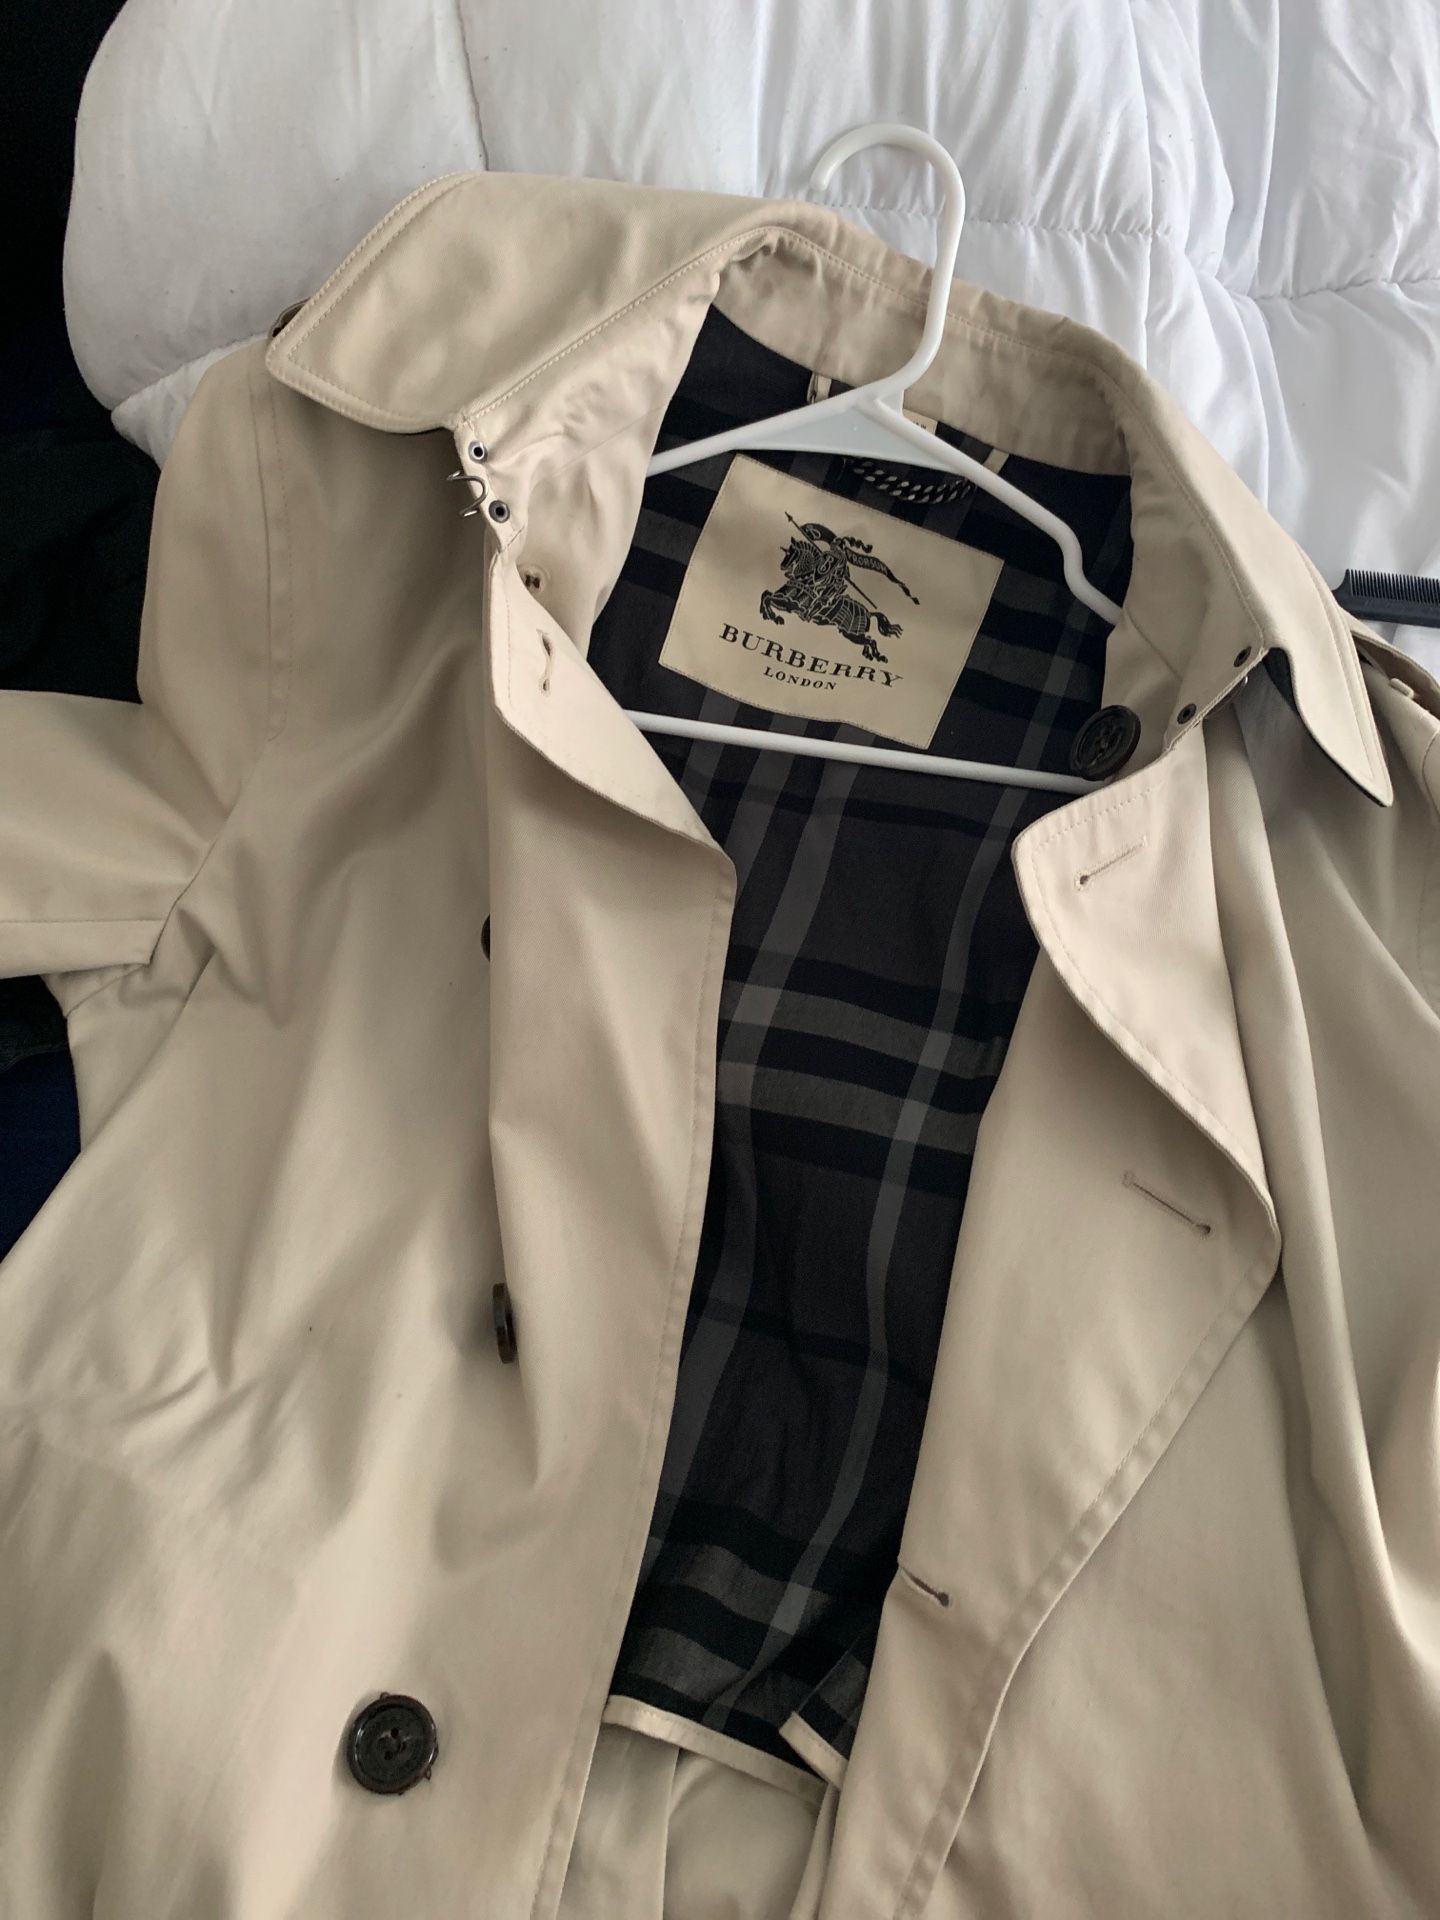 Burberry jacket for sale